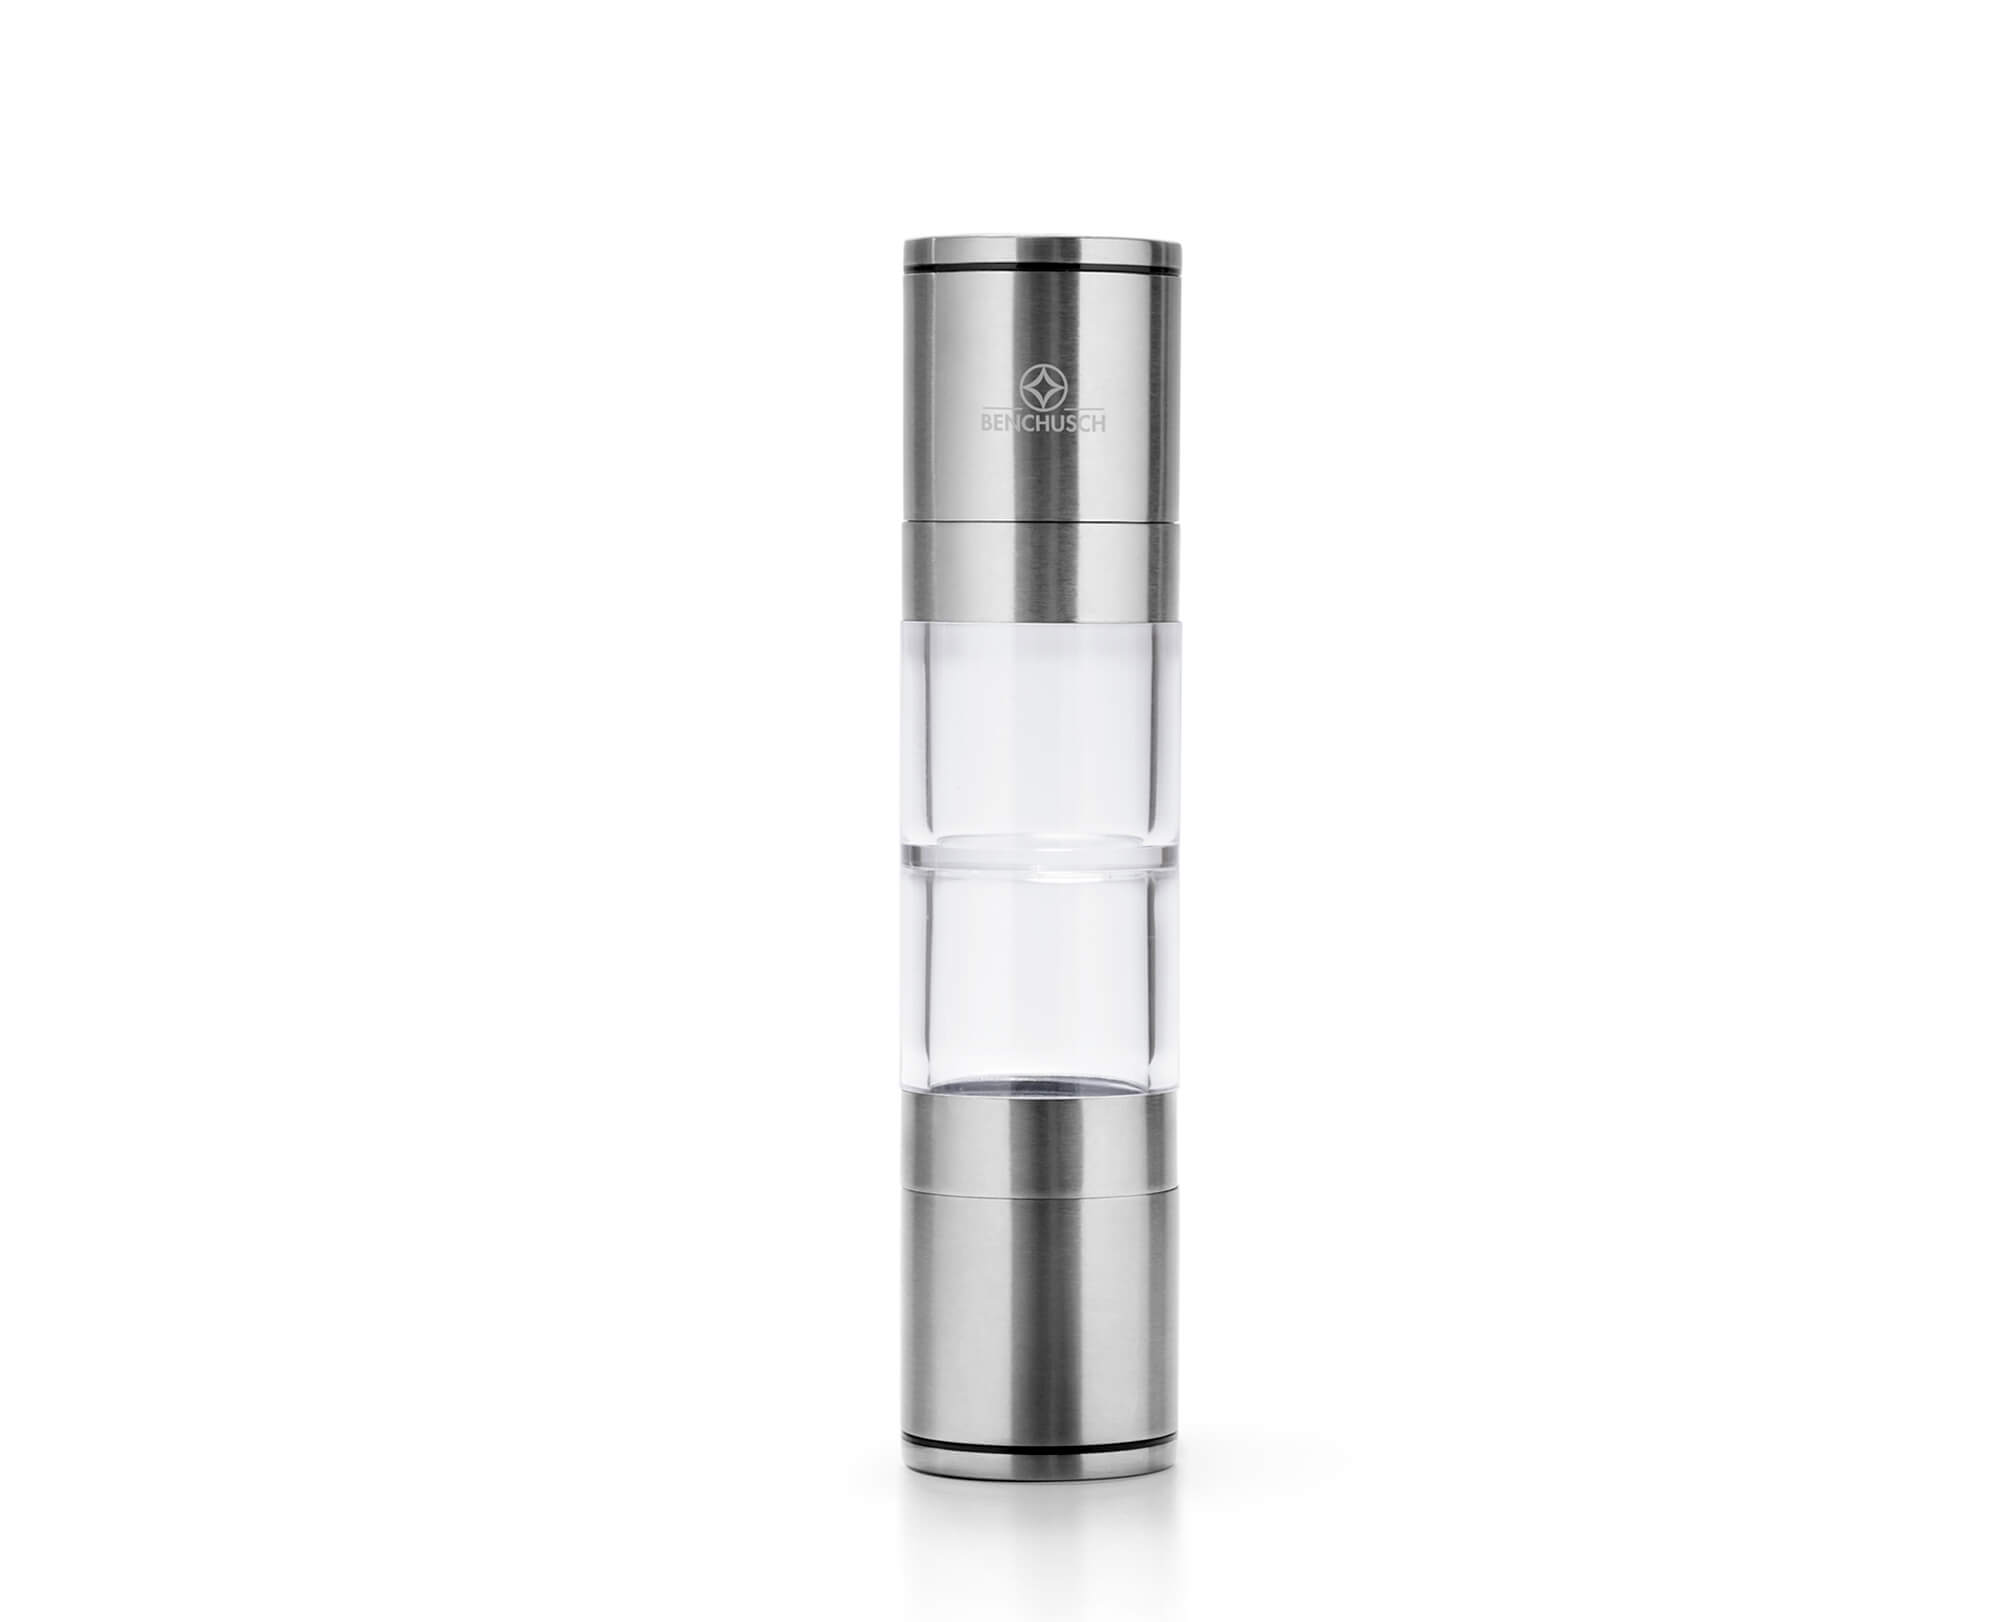 Benchusch Compact 2 in 1 Salt and Pepper Grinder with empty transparent acrylic chamber on the white background